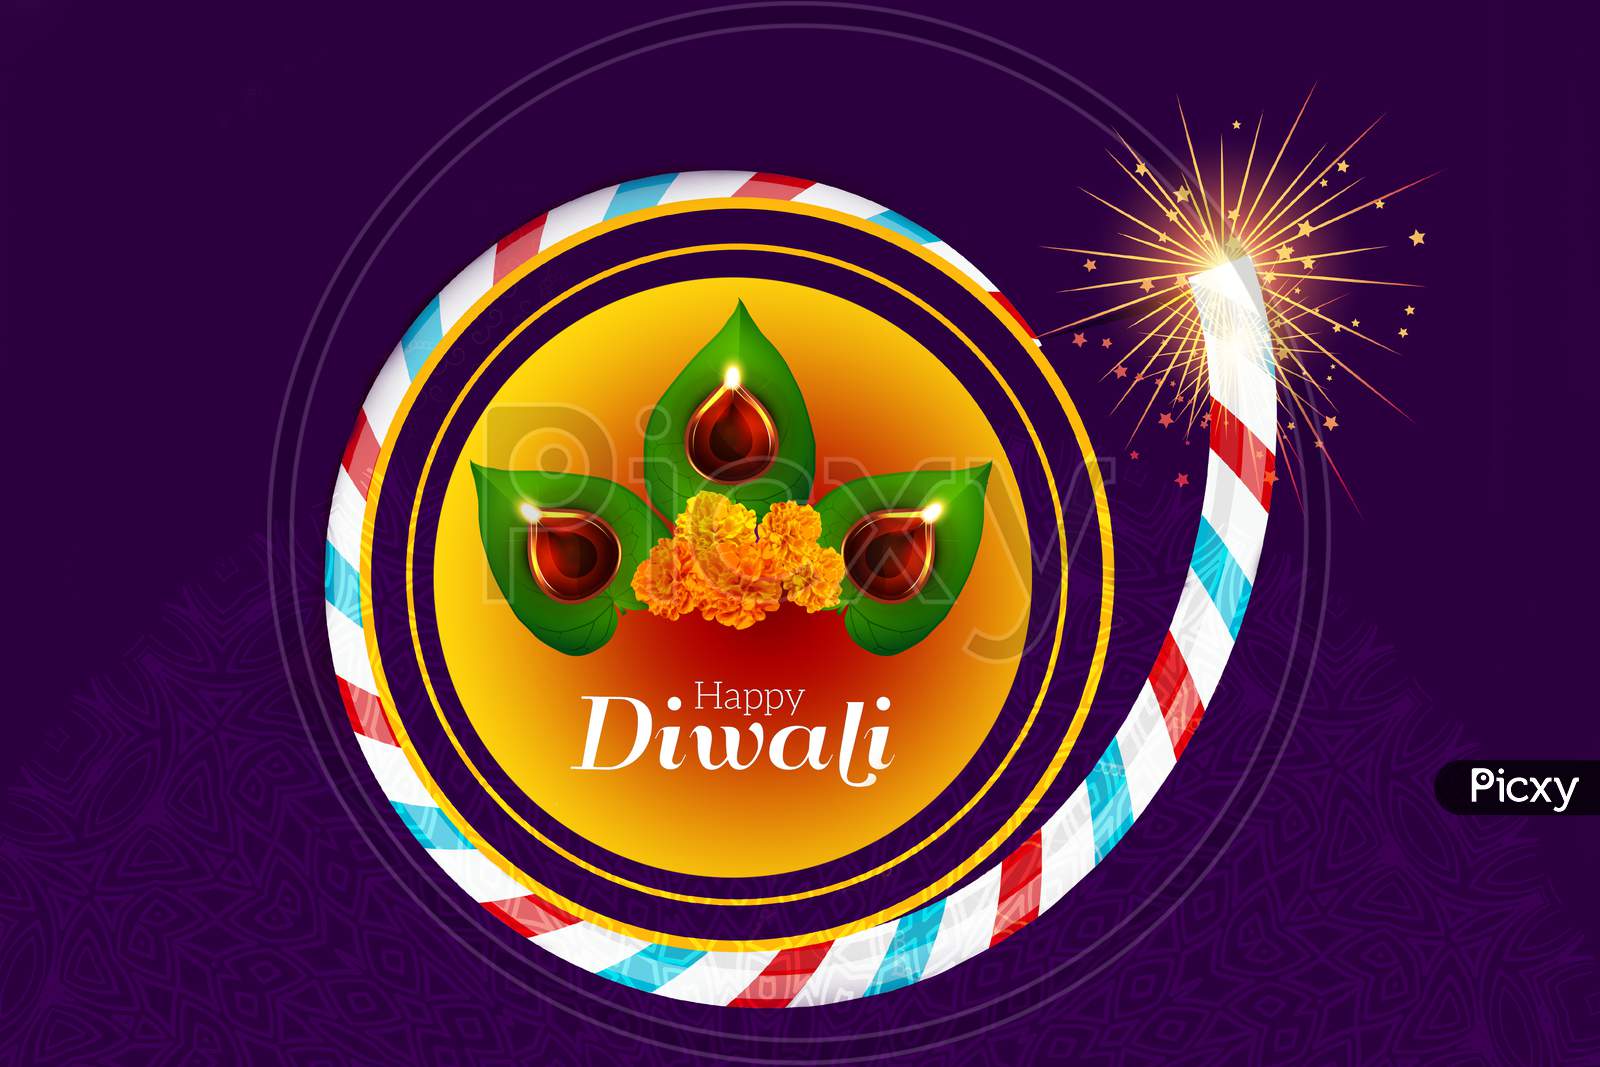 A Concept of Happy Diwali Greetings